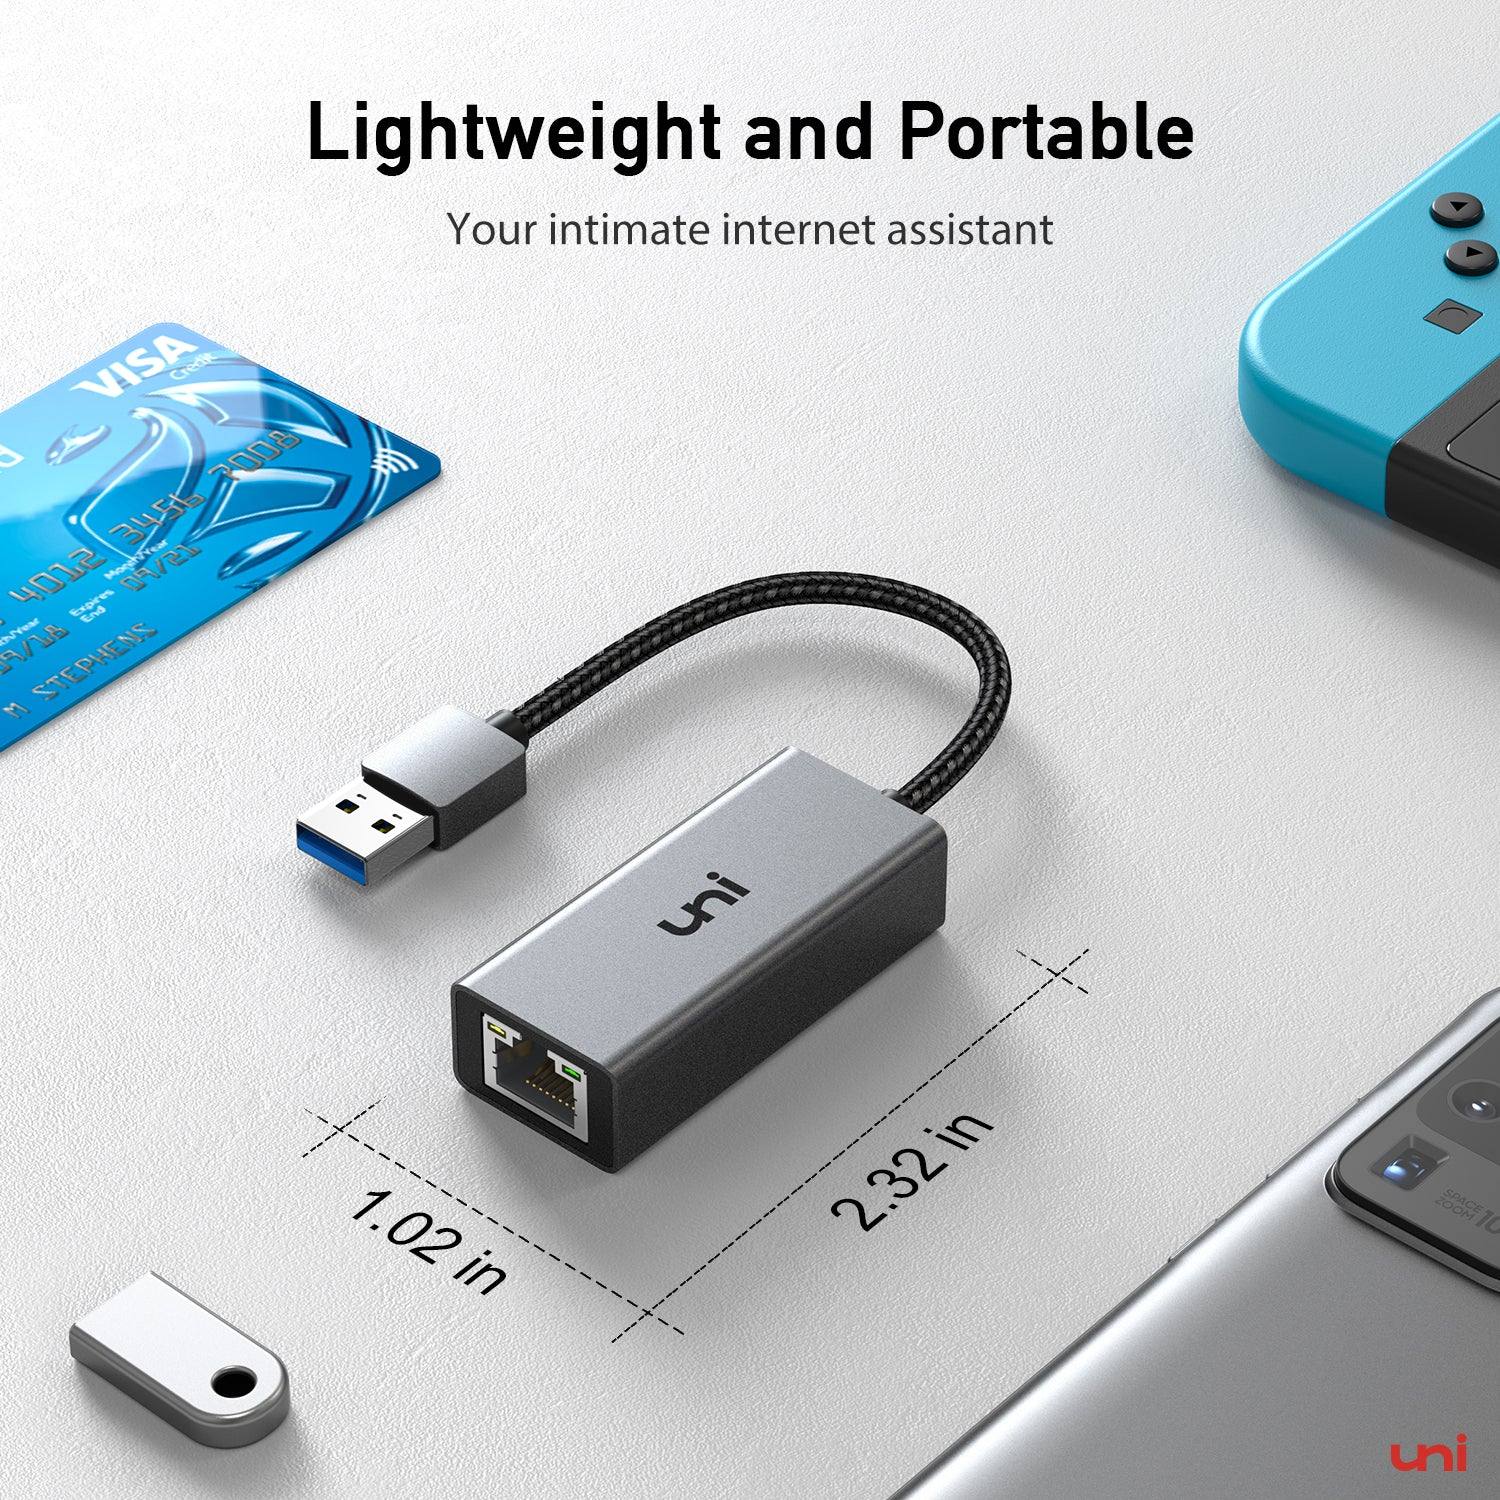 Lightweight and Portable Ethernet Adapter | uni